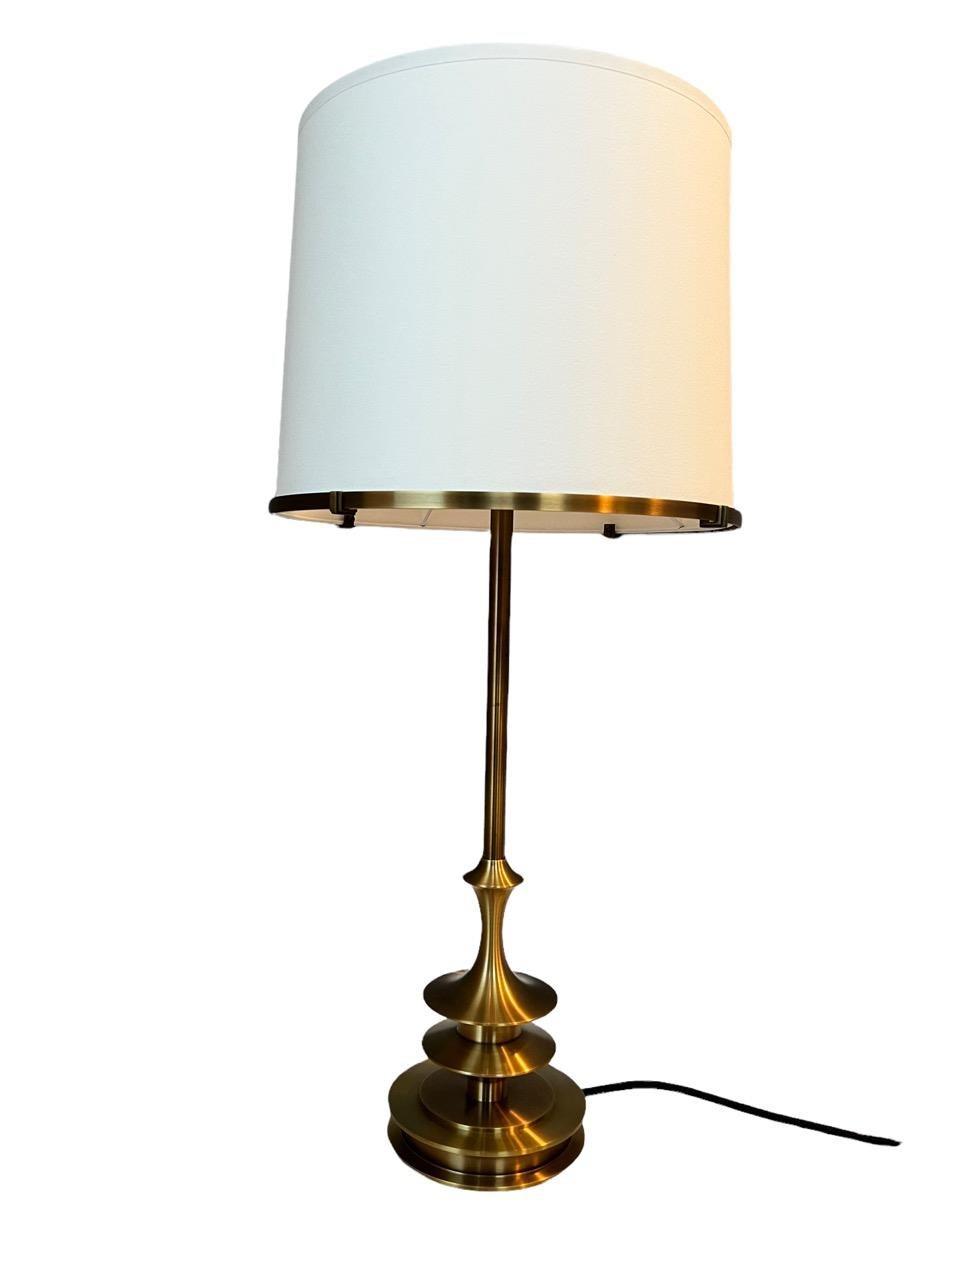 Contemporary Pair of Side Table Lamps, Solid Brass by Designer Solis Betancourt 14